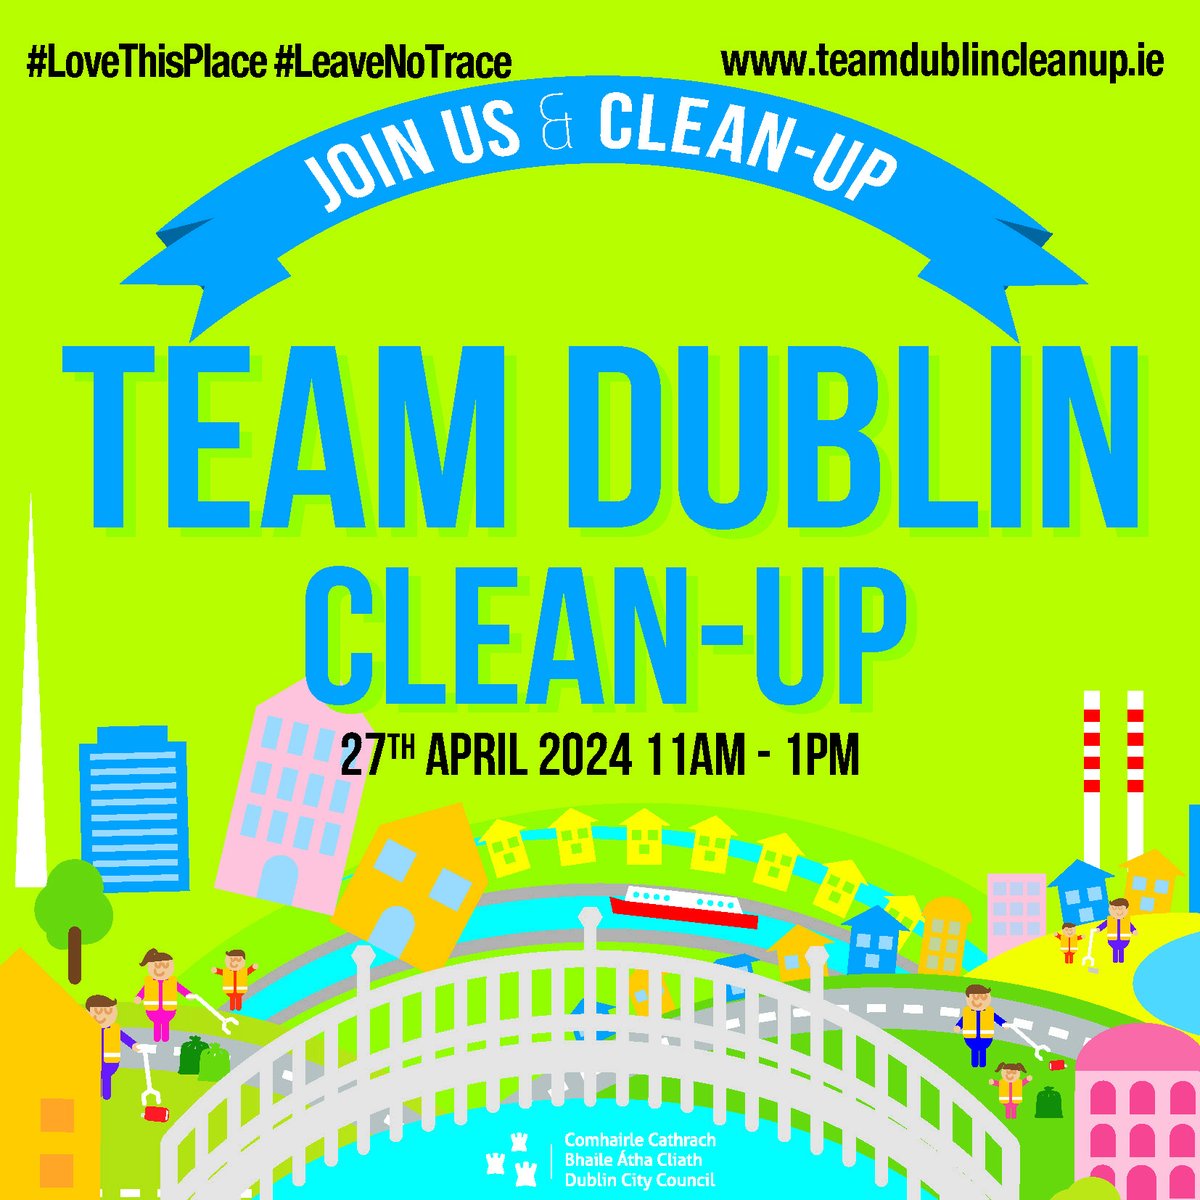 Donnybrook Tidytowns are participating in the Team #Dublin Cleanup this Saturday 27th April 2024. Meeting at the Plaza #Donnybrook 11am. All welcome and new volunteers urgently required. #LoveThisPlace #LeaveNoTrace